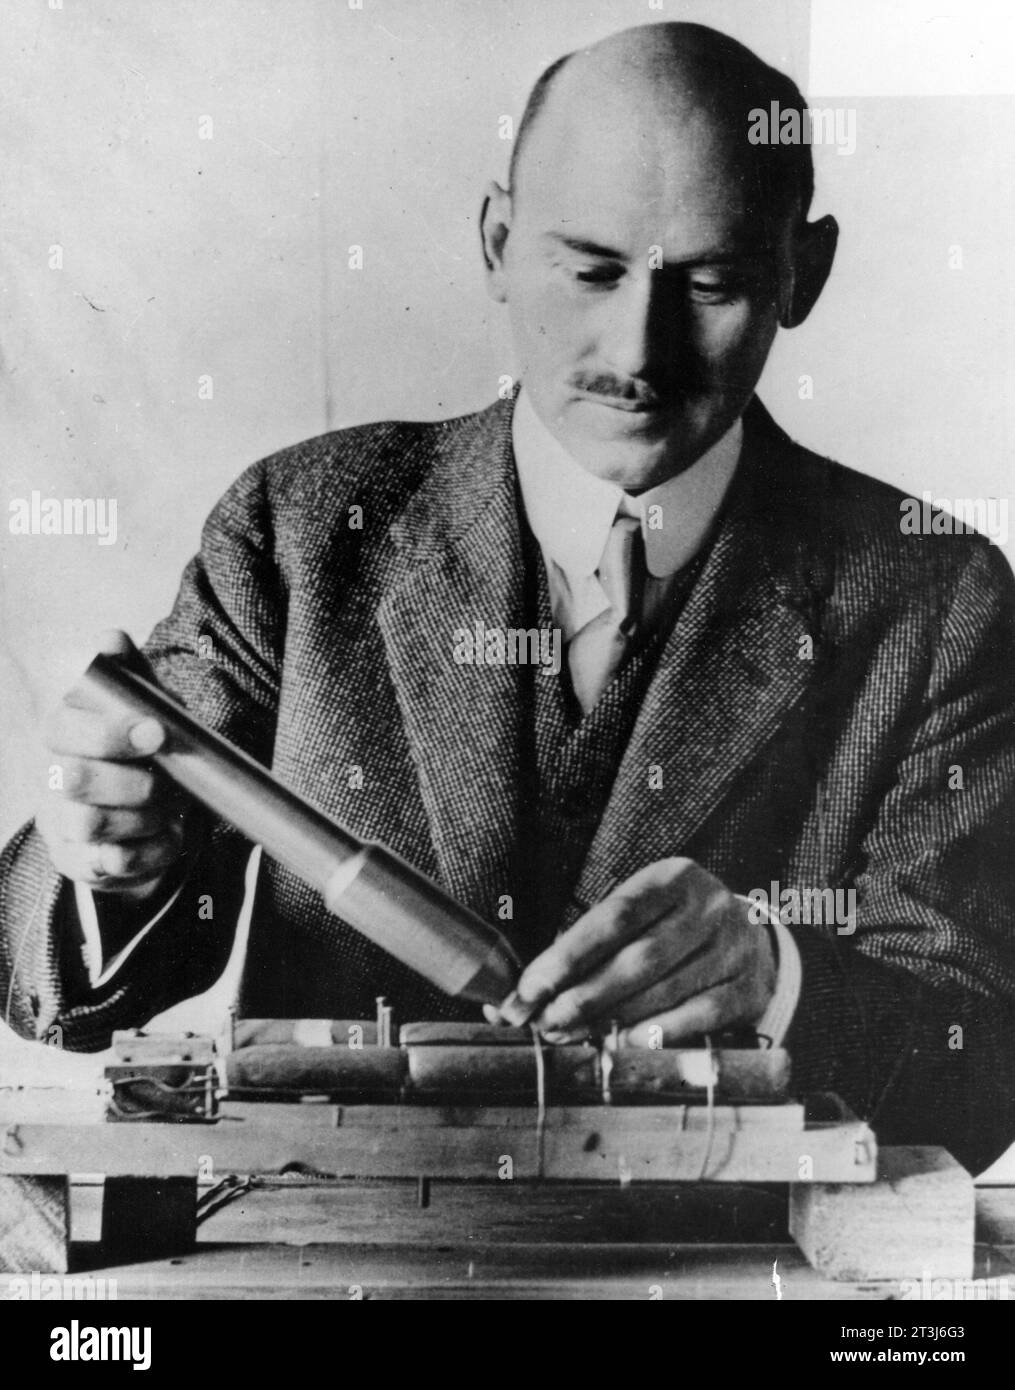 Dr. Robert Hutchings Goddard (1882-1945). Dr. Goddard has been recognized as the father of American rocketry and as one of the pioneers in the theoretical exploration of space. Stock Photo